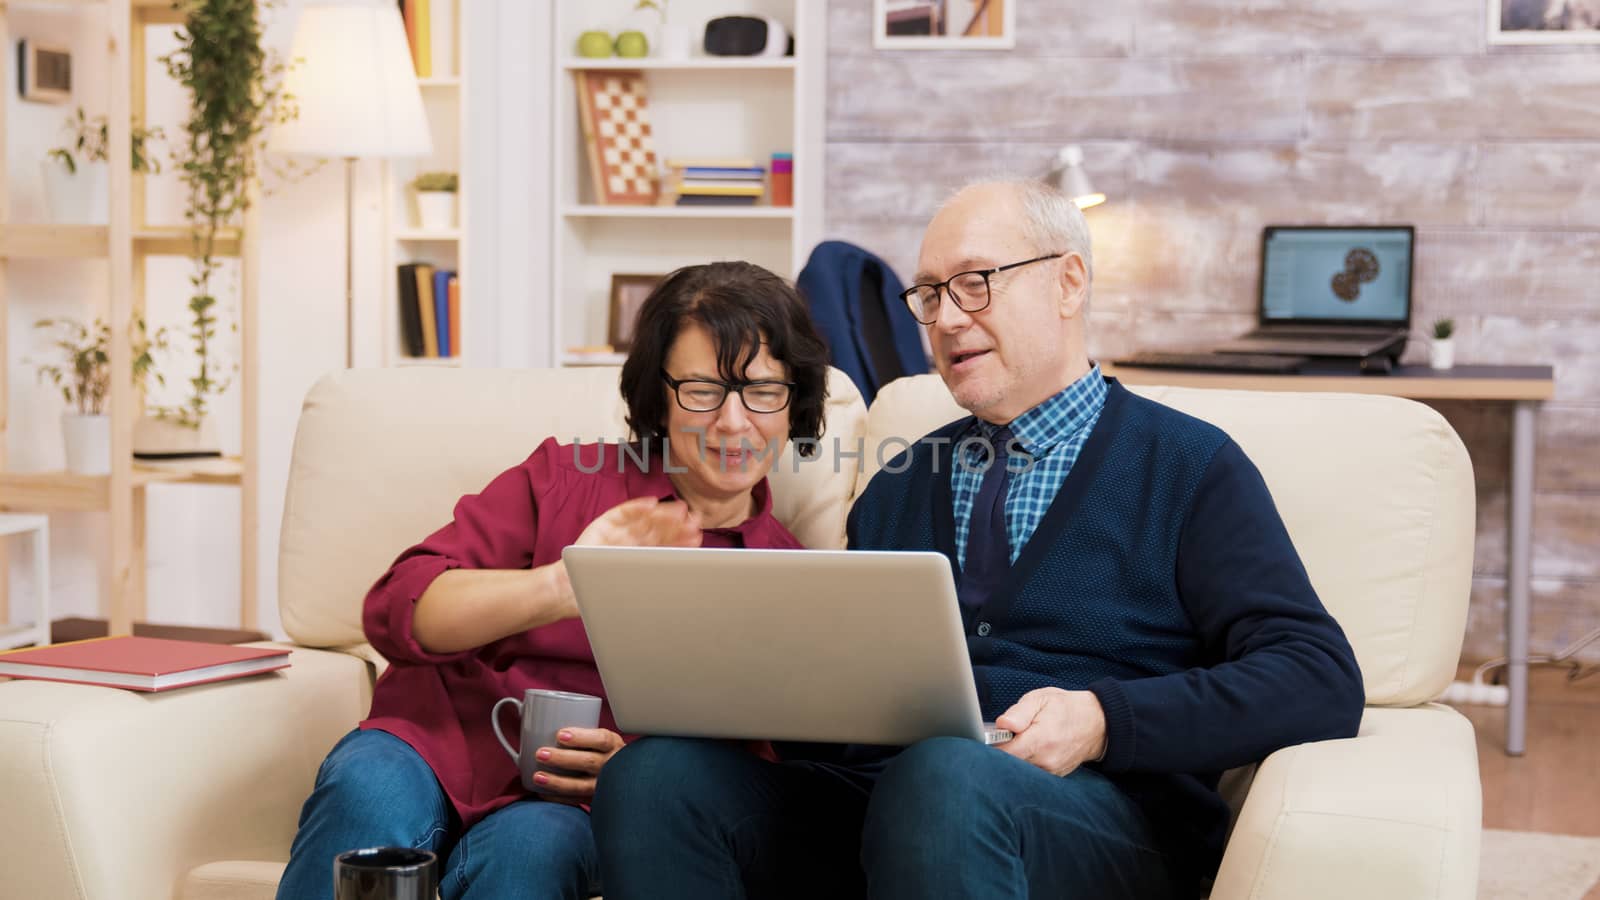 Elderly age couple with glasses sitting on sofa during a video call on laptop. by DCStudio